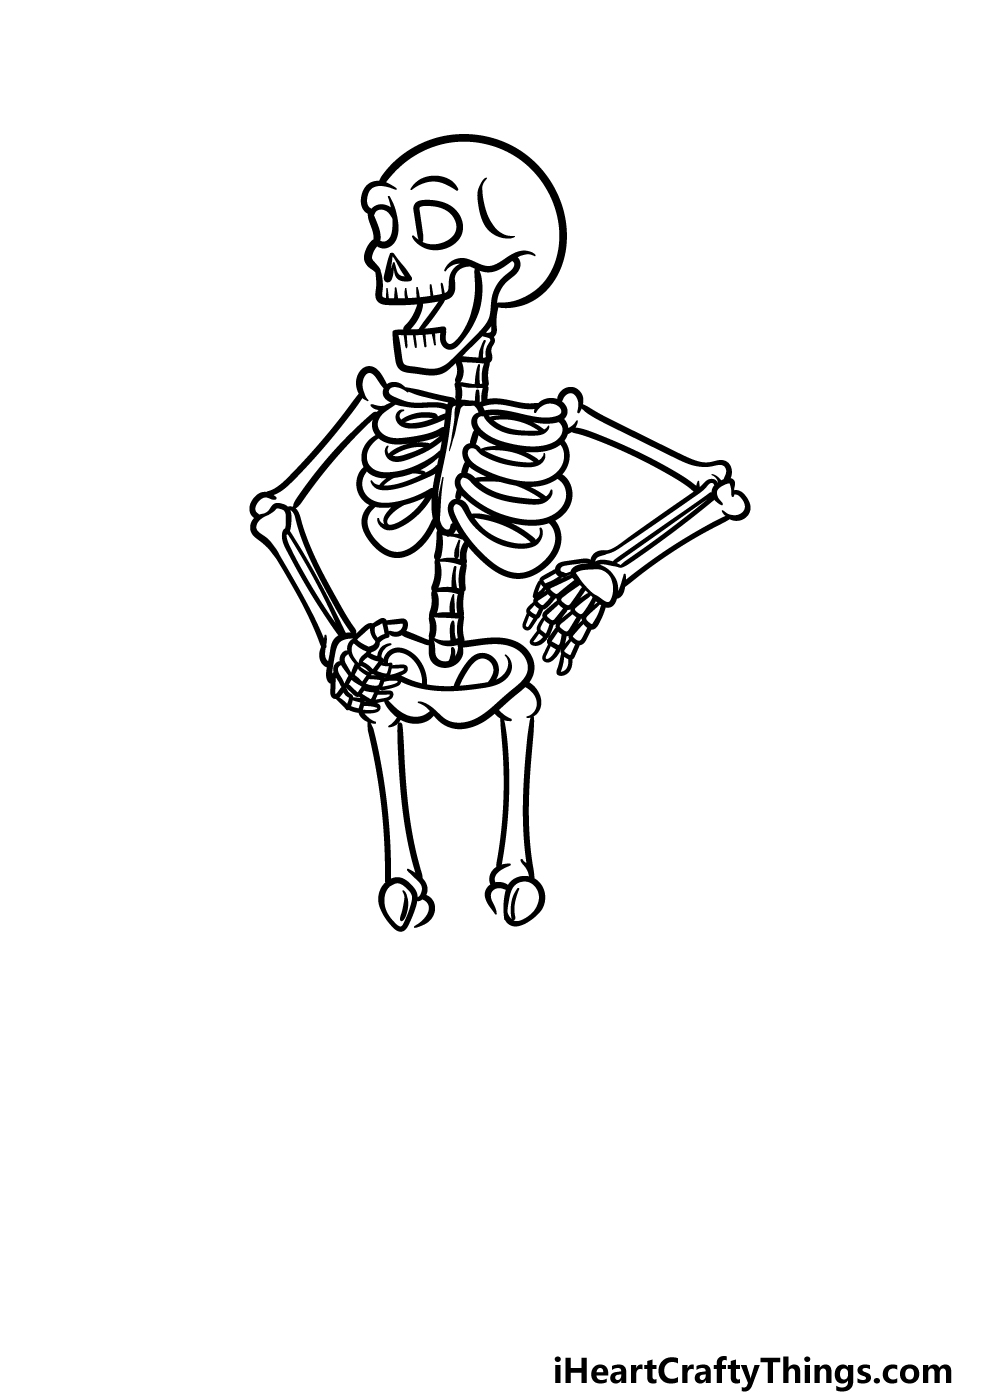 Cartoon Skeleton Drawing - How To Draw A Cartoon Skeleton Step By Step